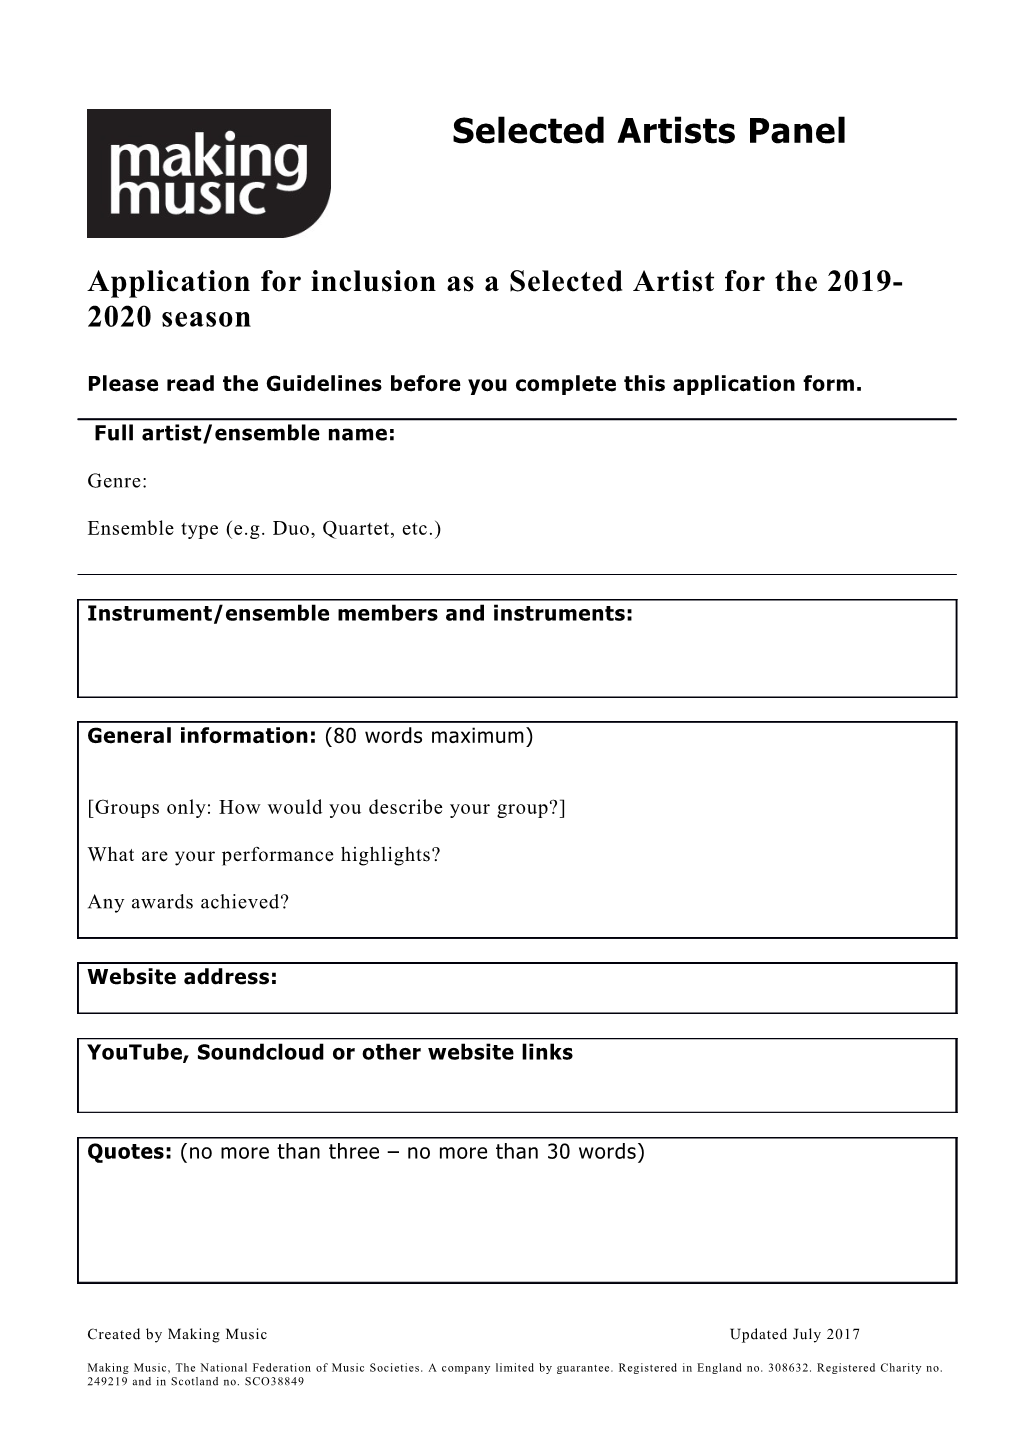 Please Read the Guidelines Before You Complete This Application Form